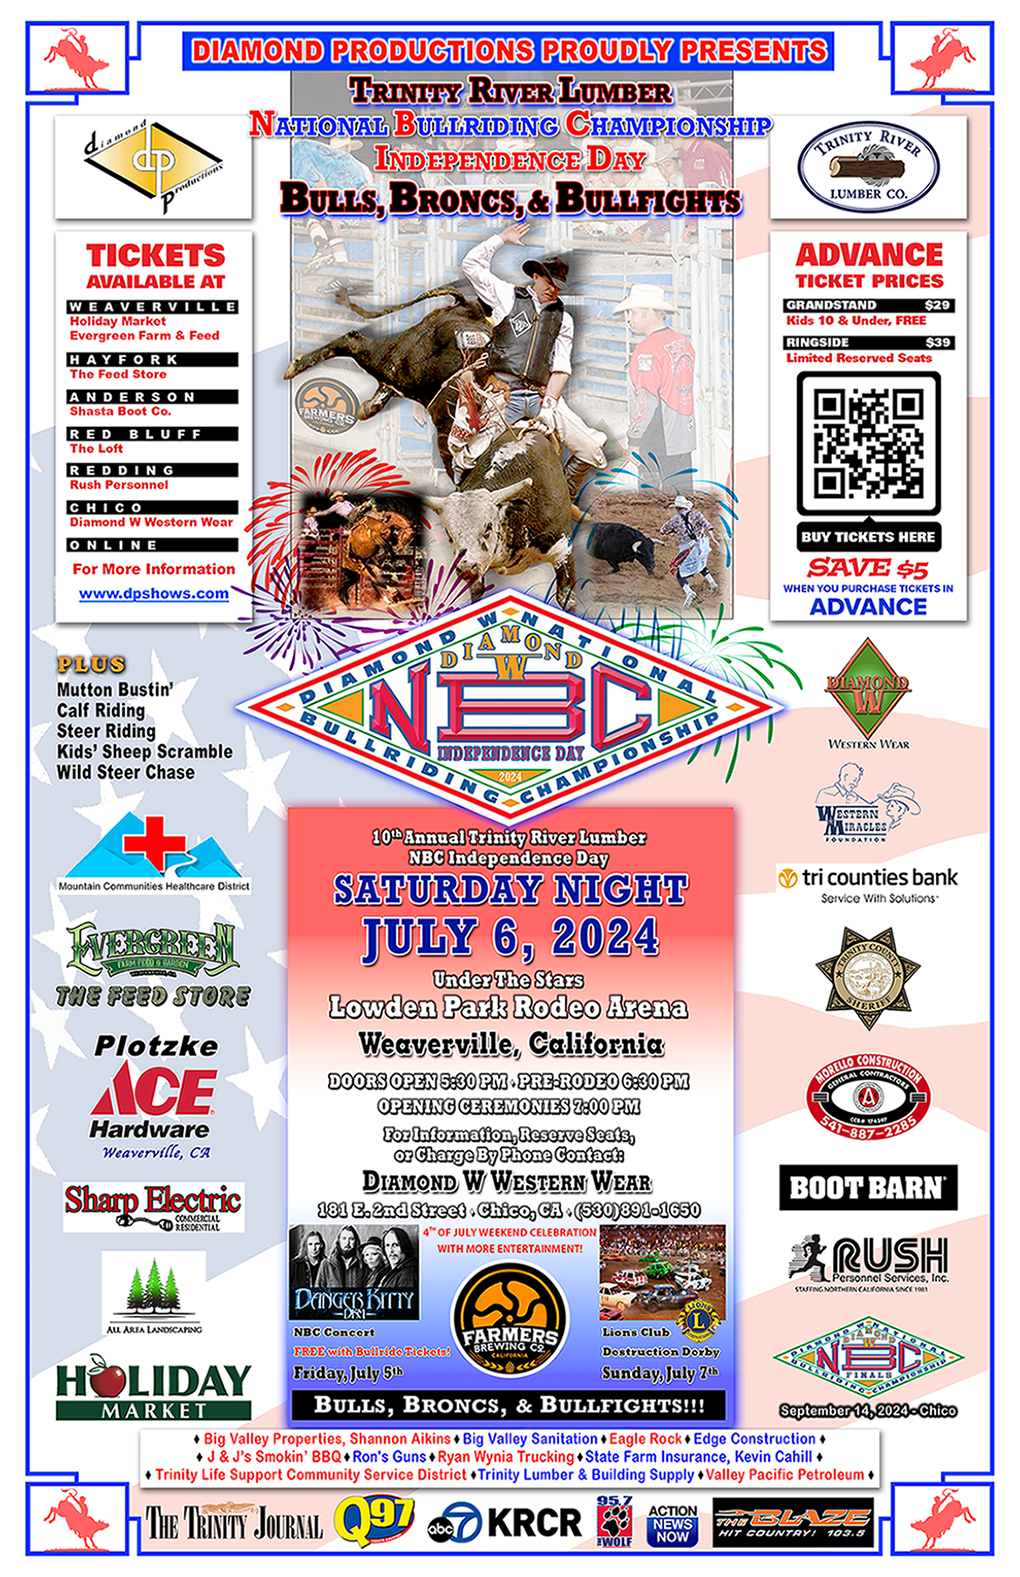 NBC Independence Day - Bulls, Broncs & Bullfights! Concert - Danger Kitty Band (the night before) on Jul 06, 18:30@Lowden Park Rodeo Arena - Buy tickets and Get information on Diamond Productions 